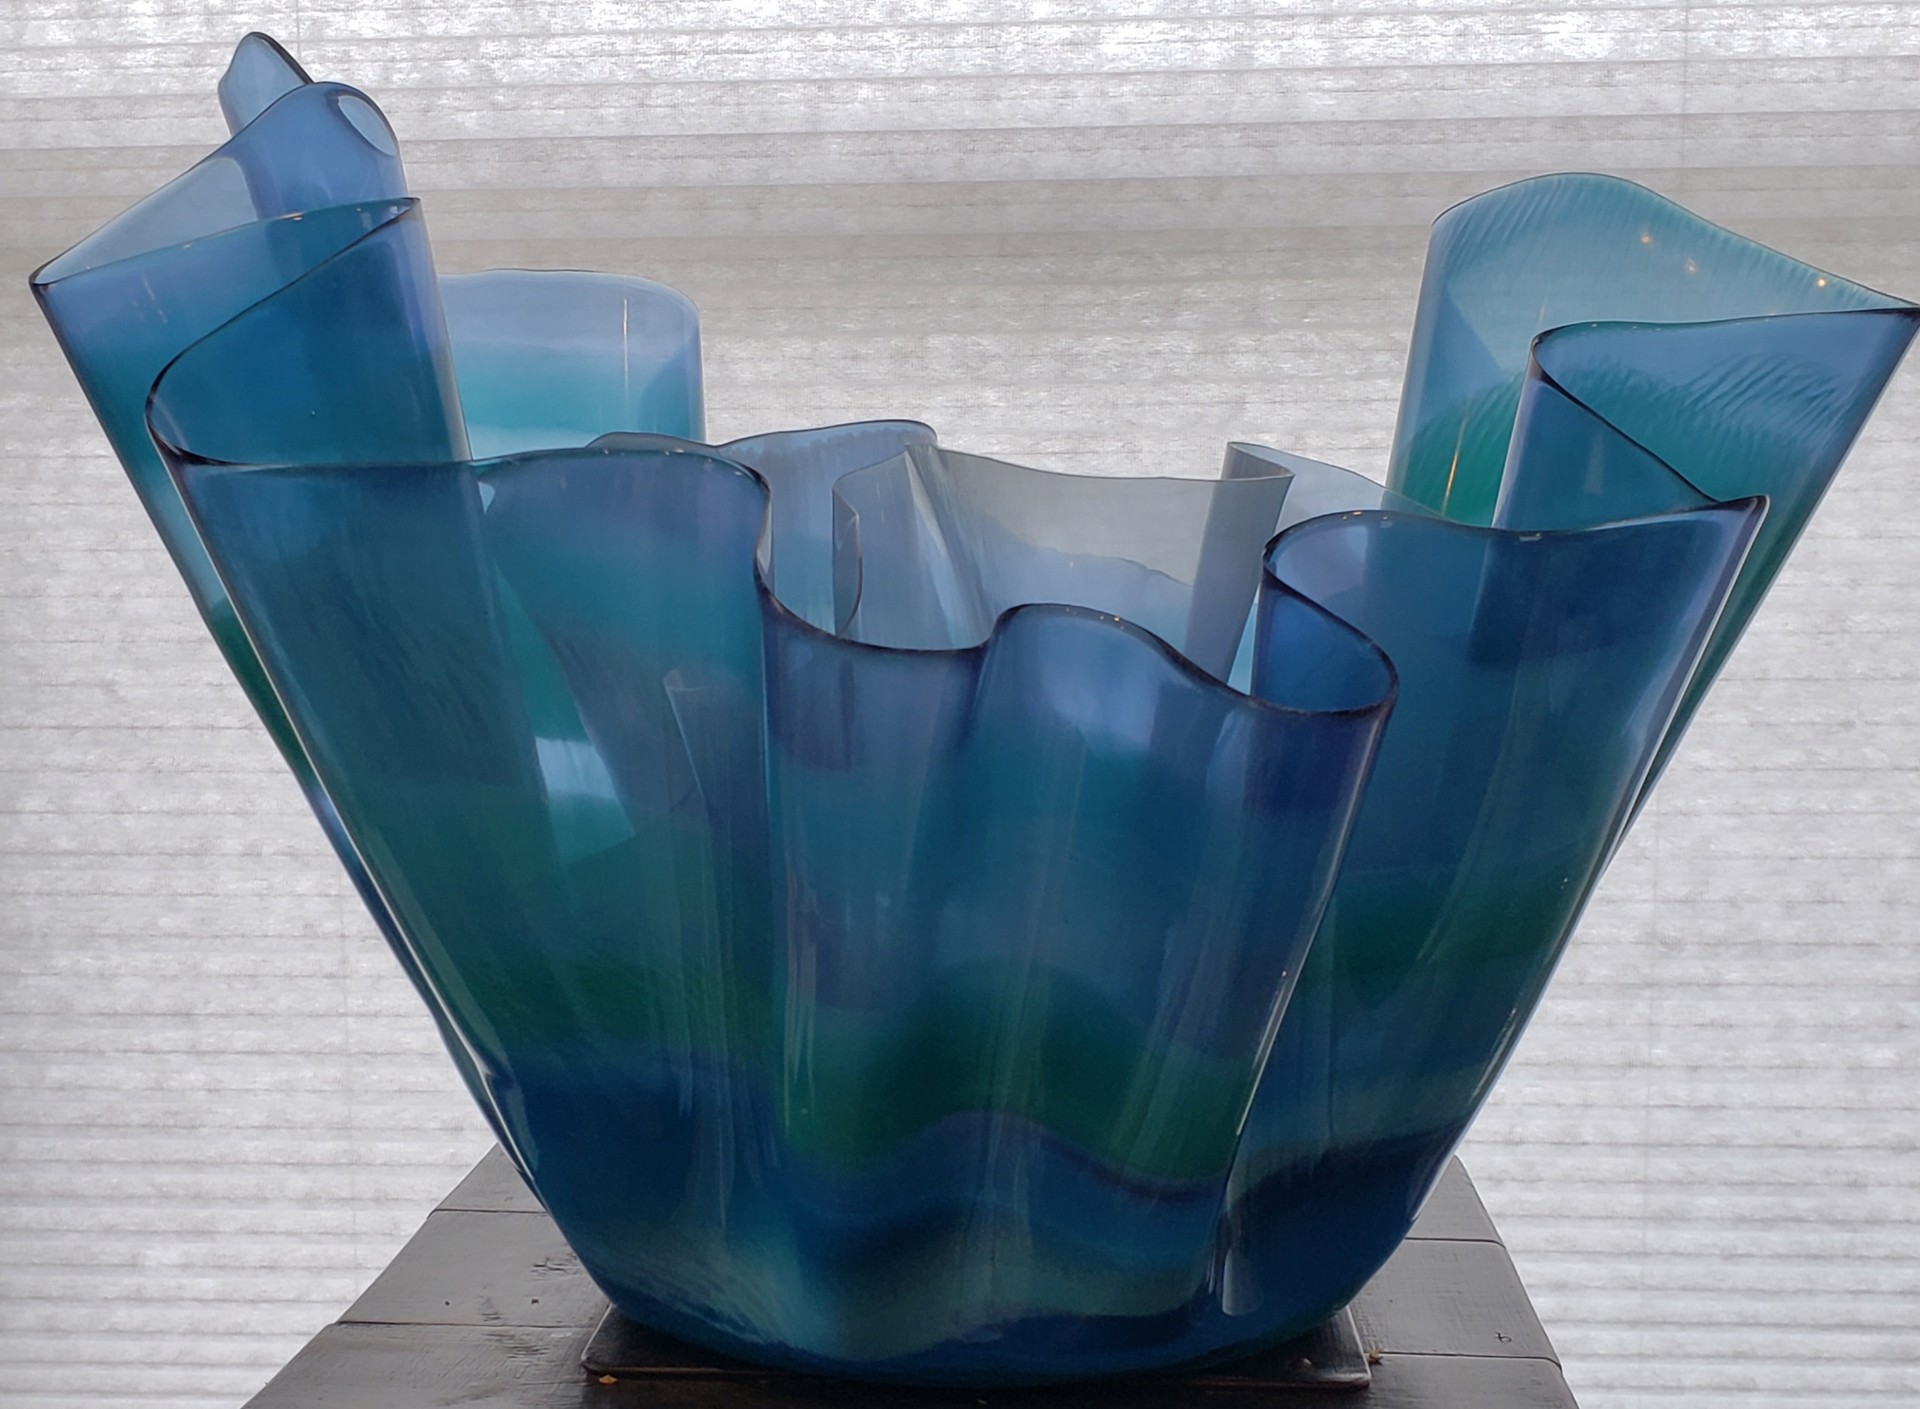 Blue Resin Vessel by Andrea Dasha Reich